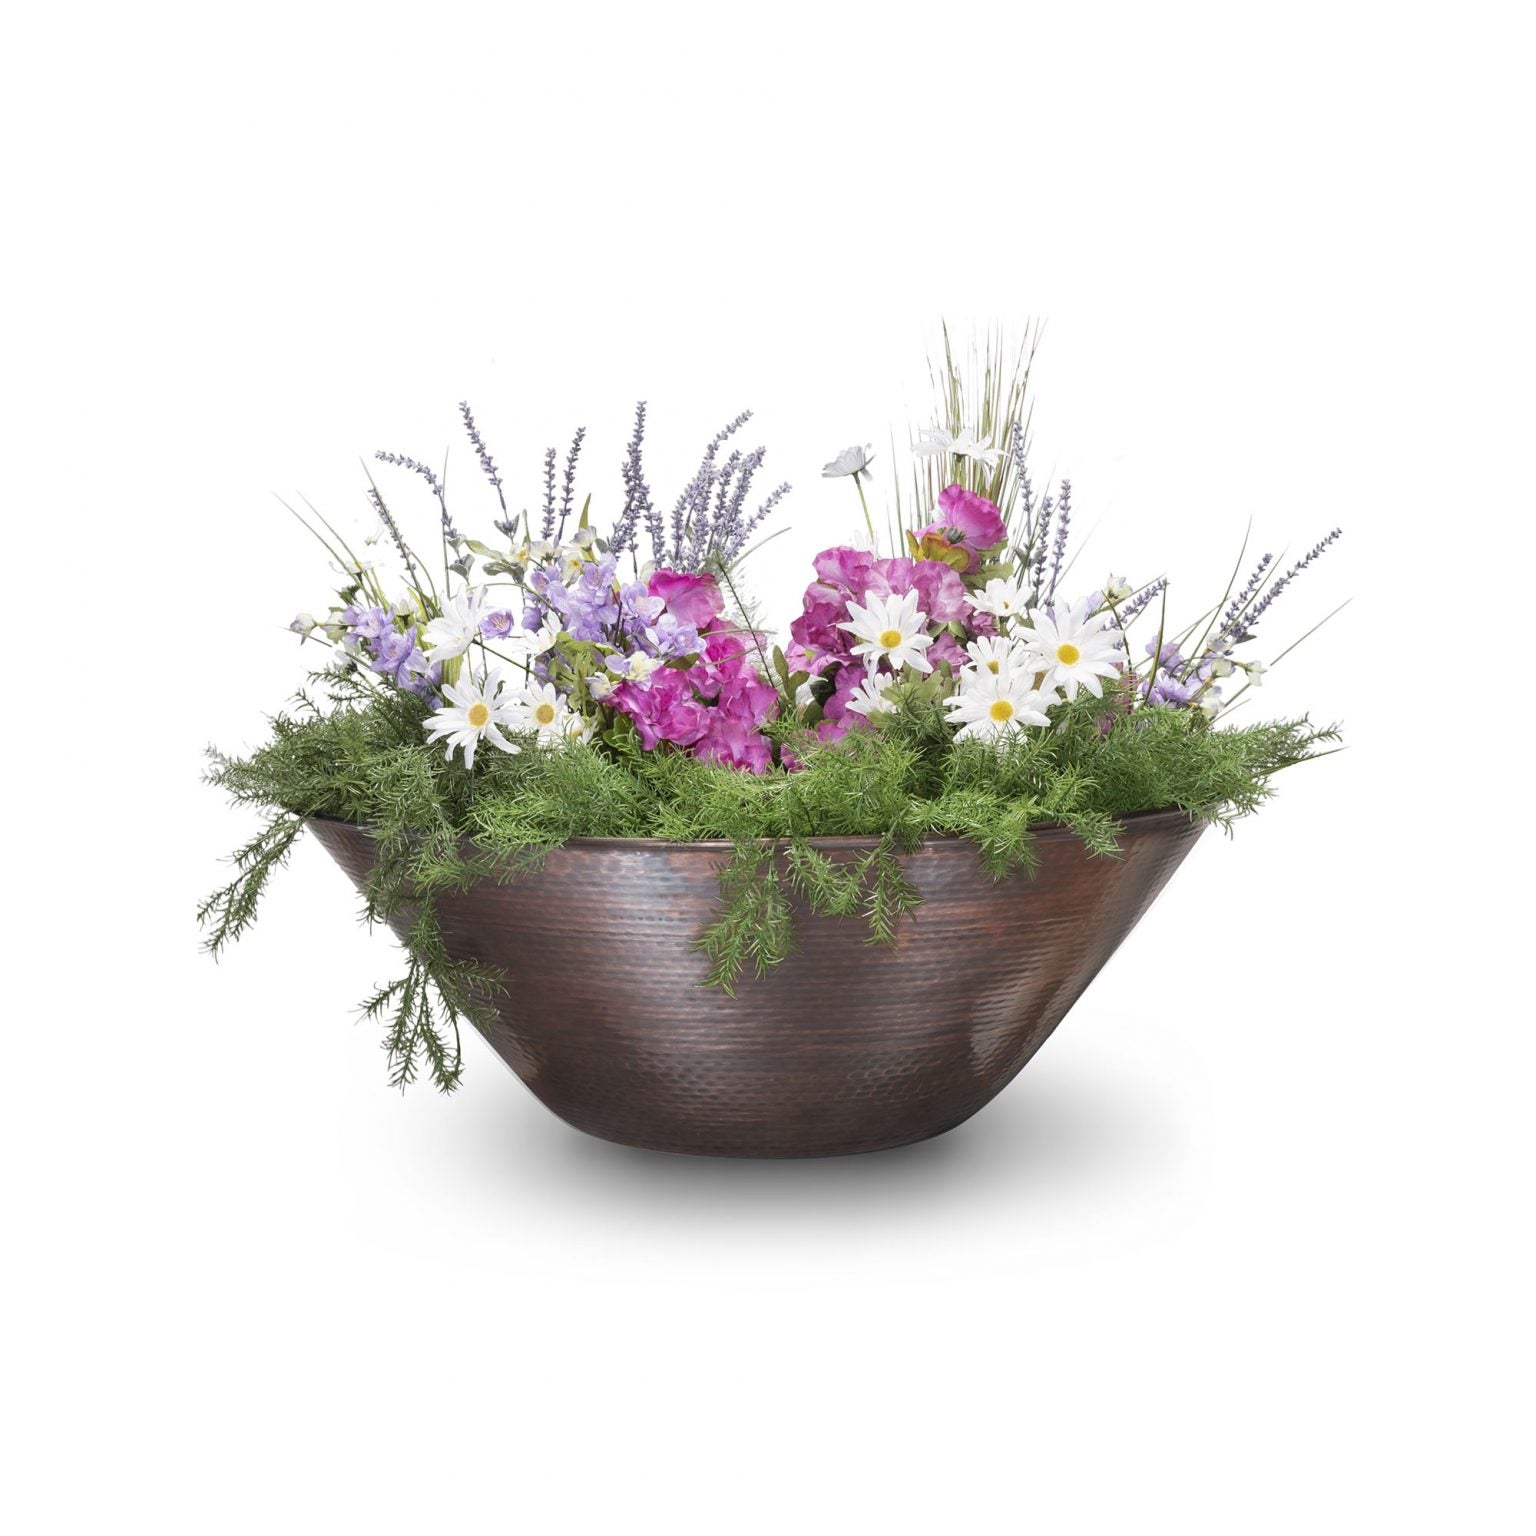 The Outdoor Plus Remi Planter Bowl Hammered Copper OPT-31RCPO - Serenity Provision